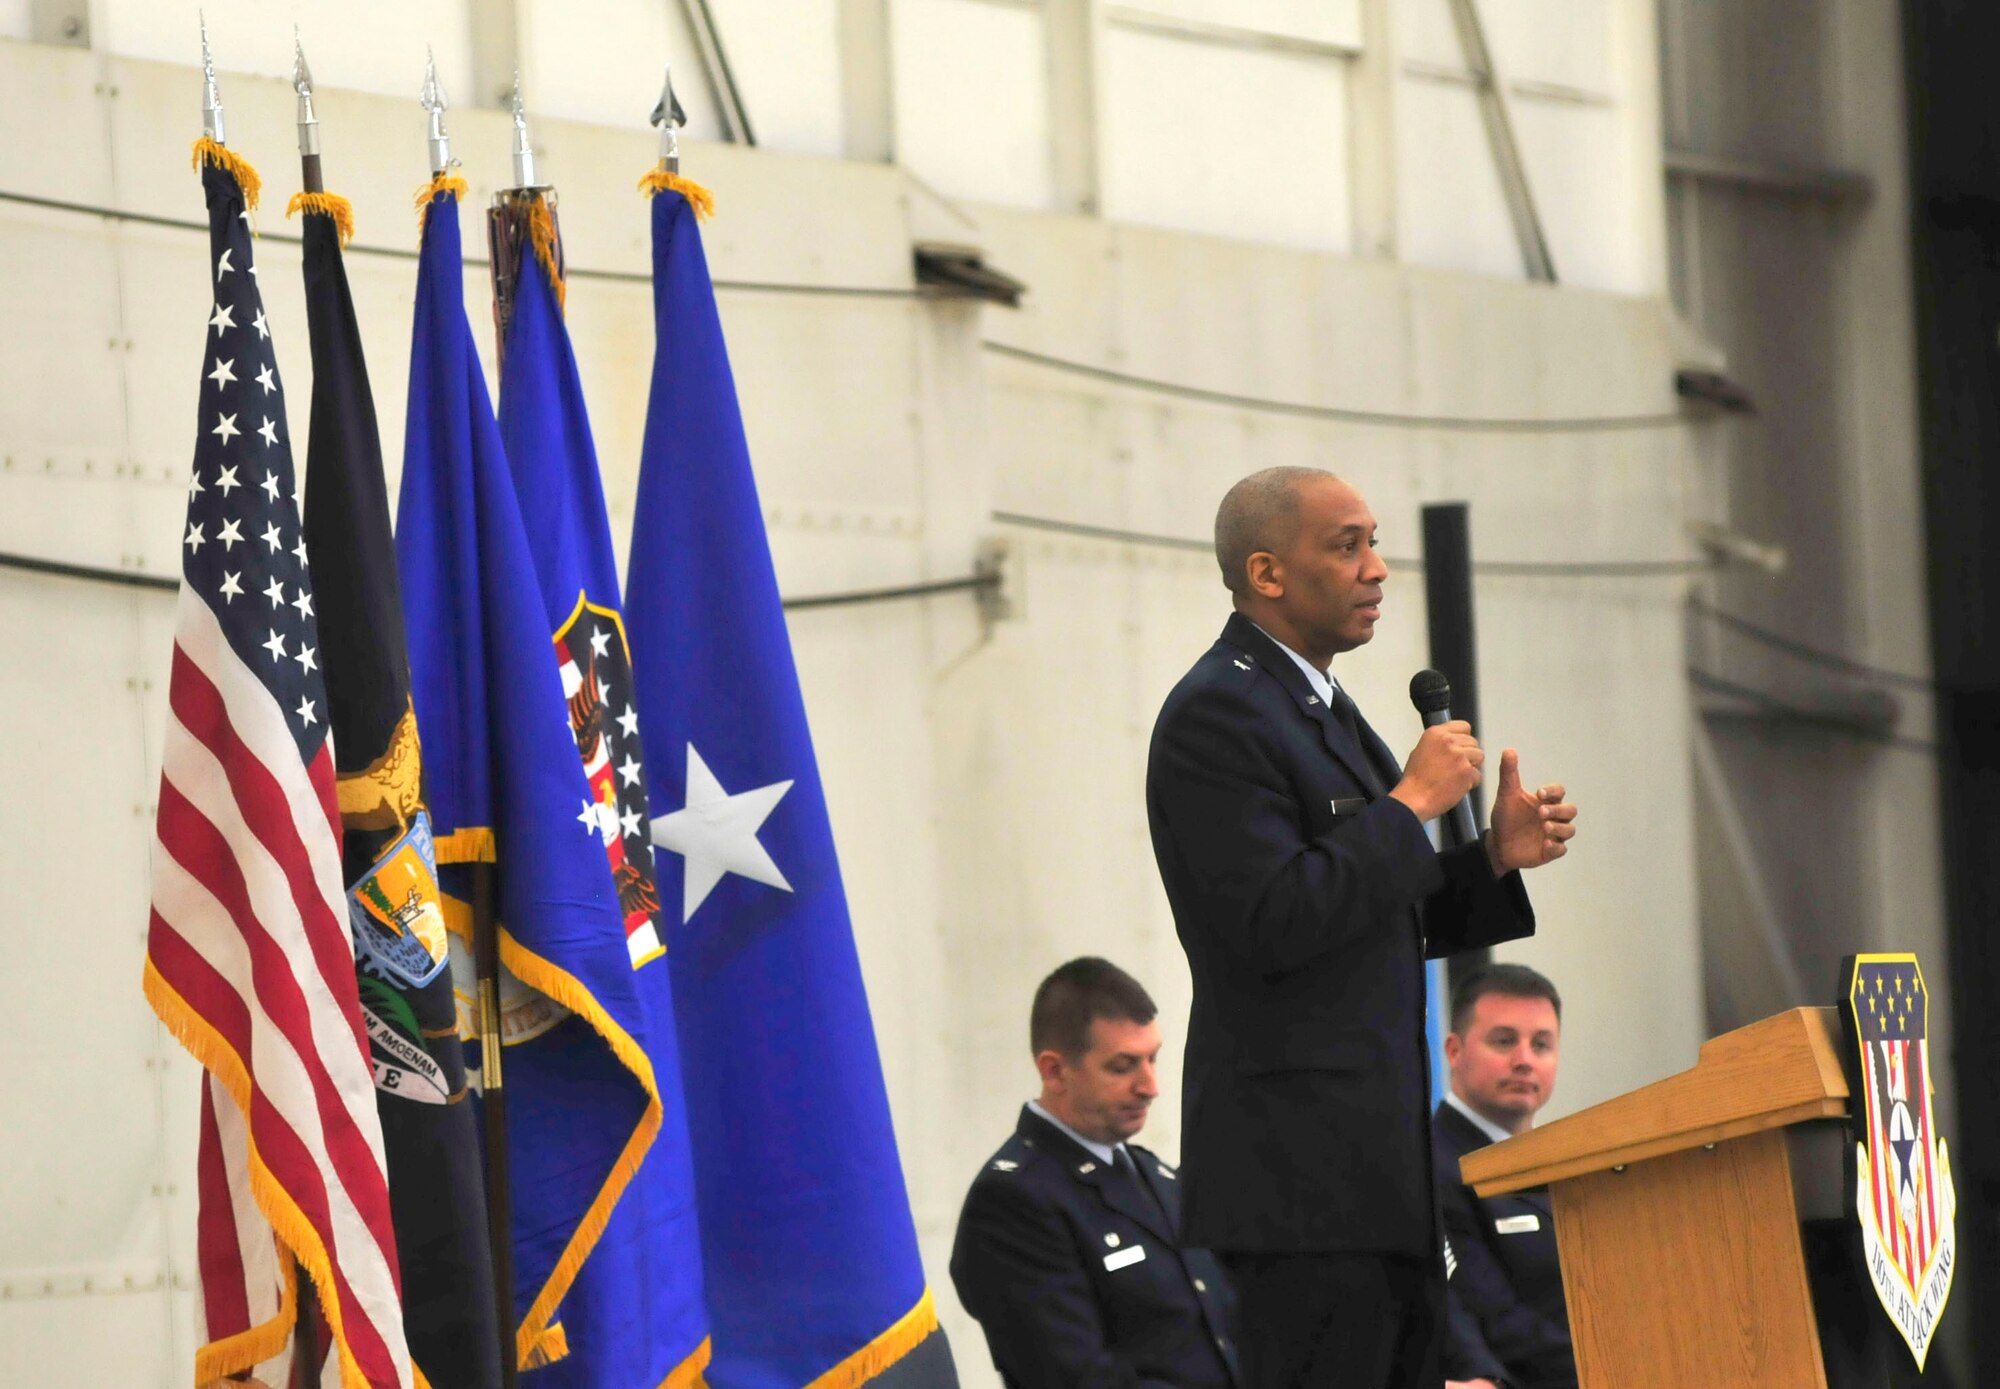 Col. Bryan Teff assumes command of the 110th Attack Wing, Battle Creek Air National Guard Base, Mich., Saturday, December 5, 2015 in the hangar of the Wing. Teff will be taking over the role of commander from Col. Ronald Wilson who has been the wing commander for three years. (Air National Guard Photo by Airman Tiffany Clark/released)